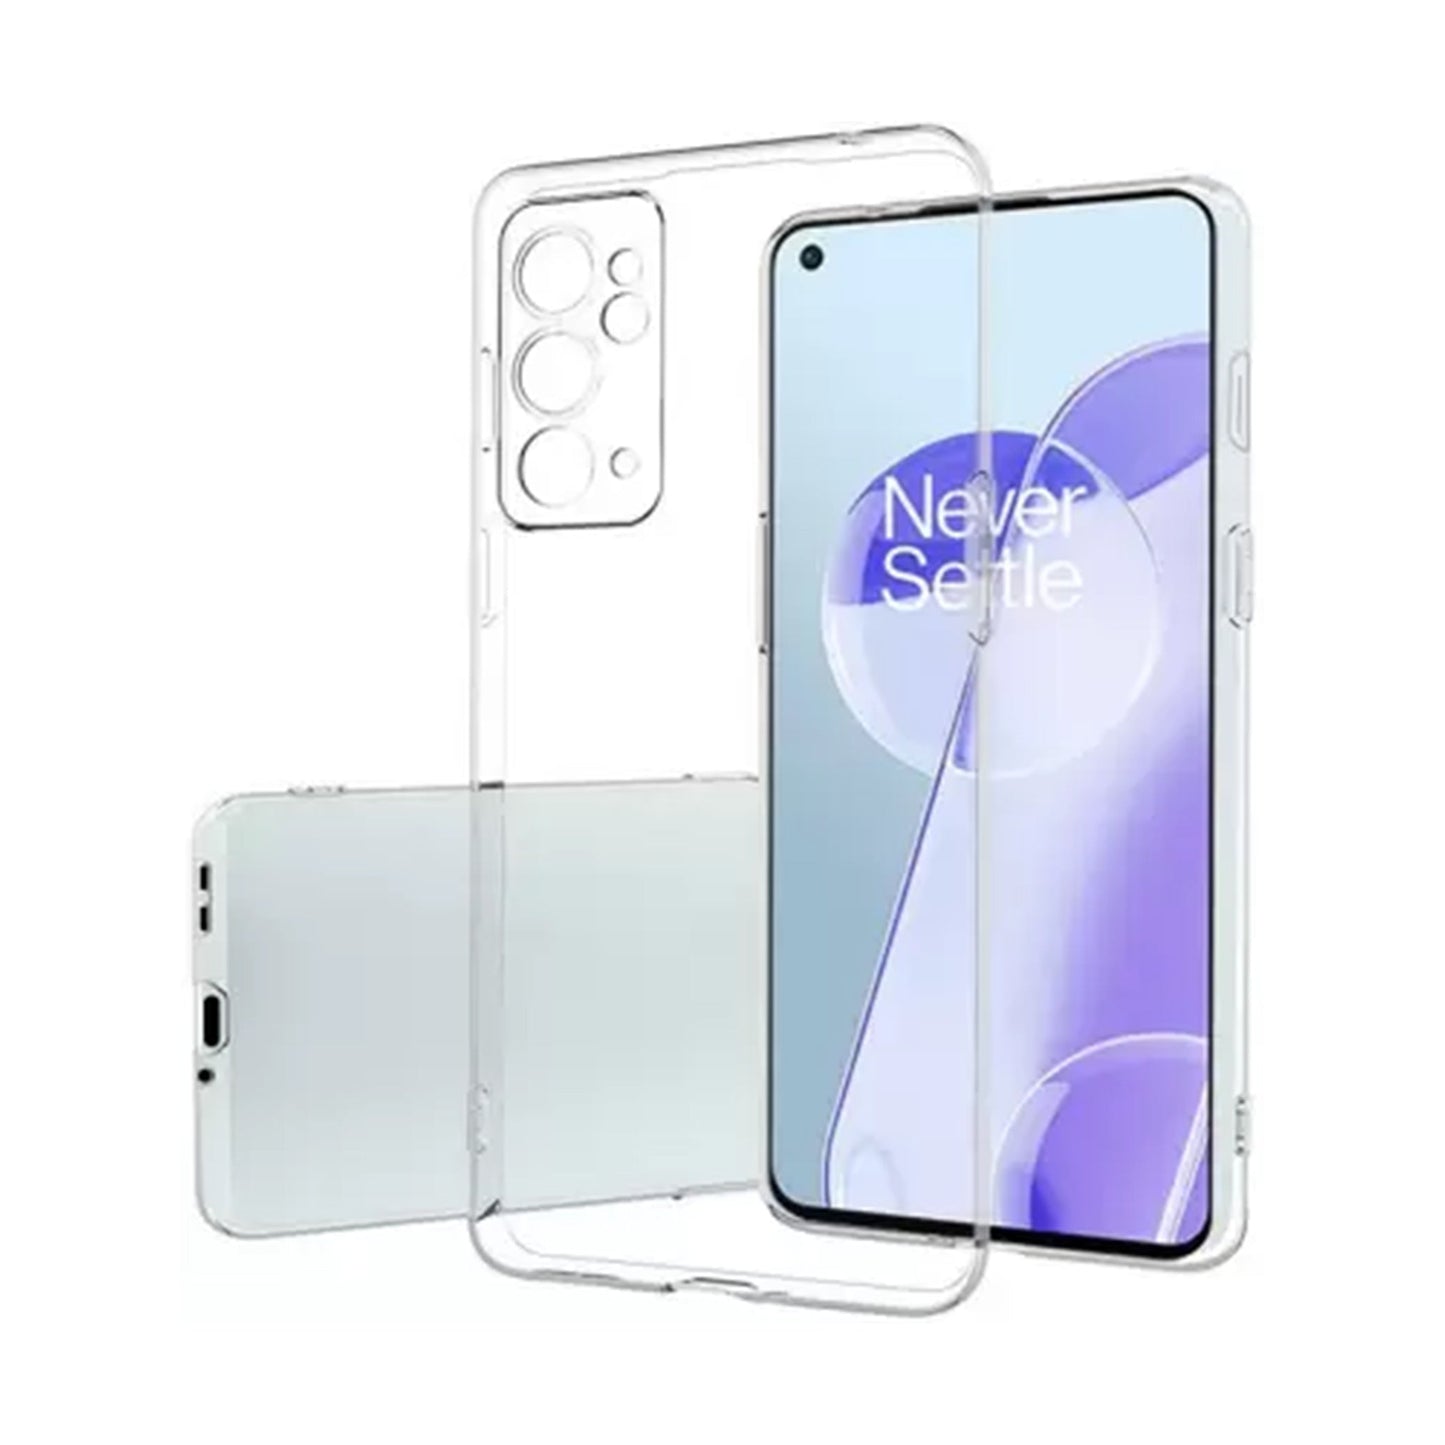 Transparent clear Crystal Phone Case For OnePlus ShopOnCliQ